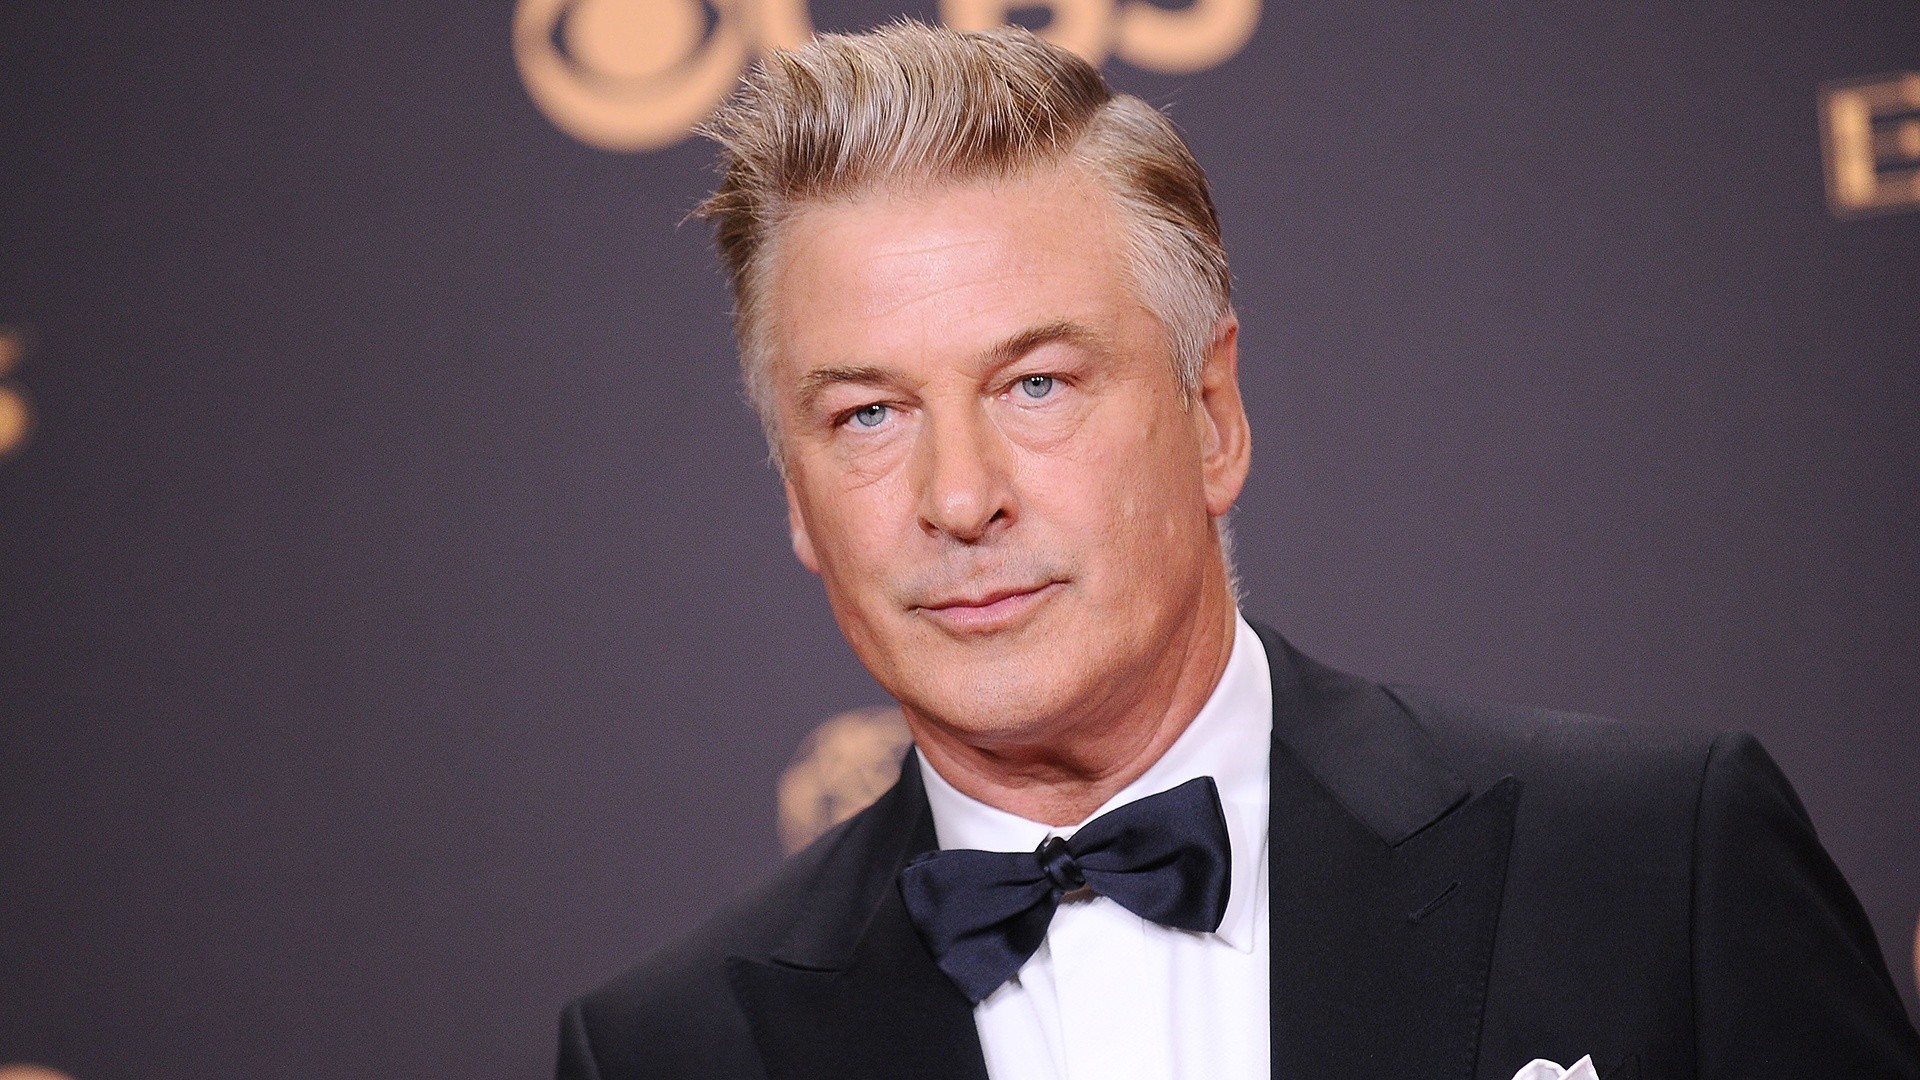 Inside Alec Baldwin's career marred by controversy